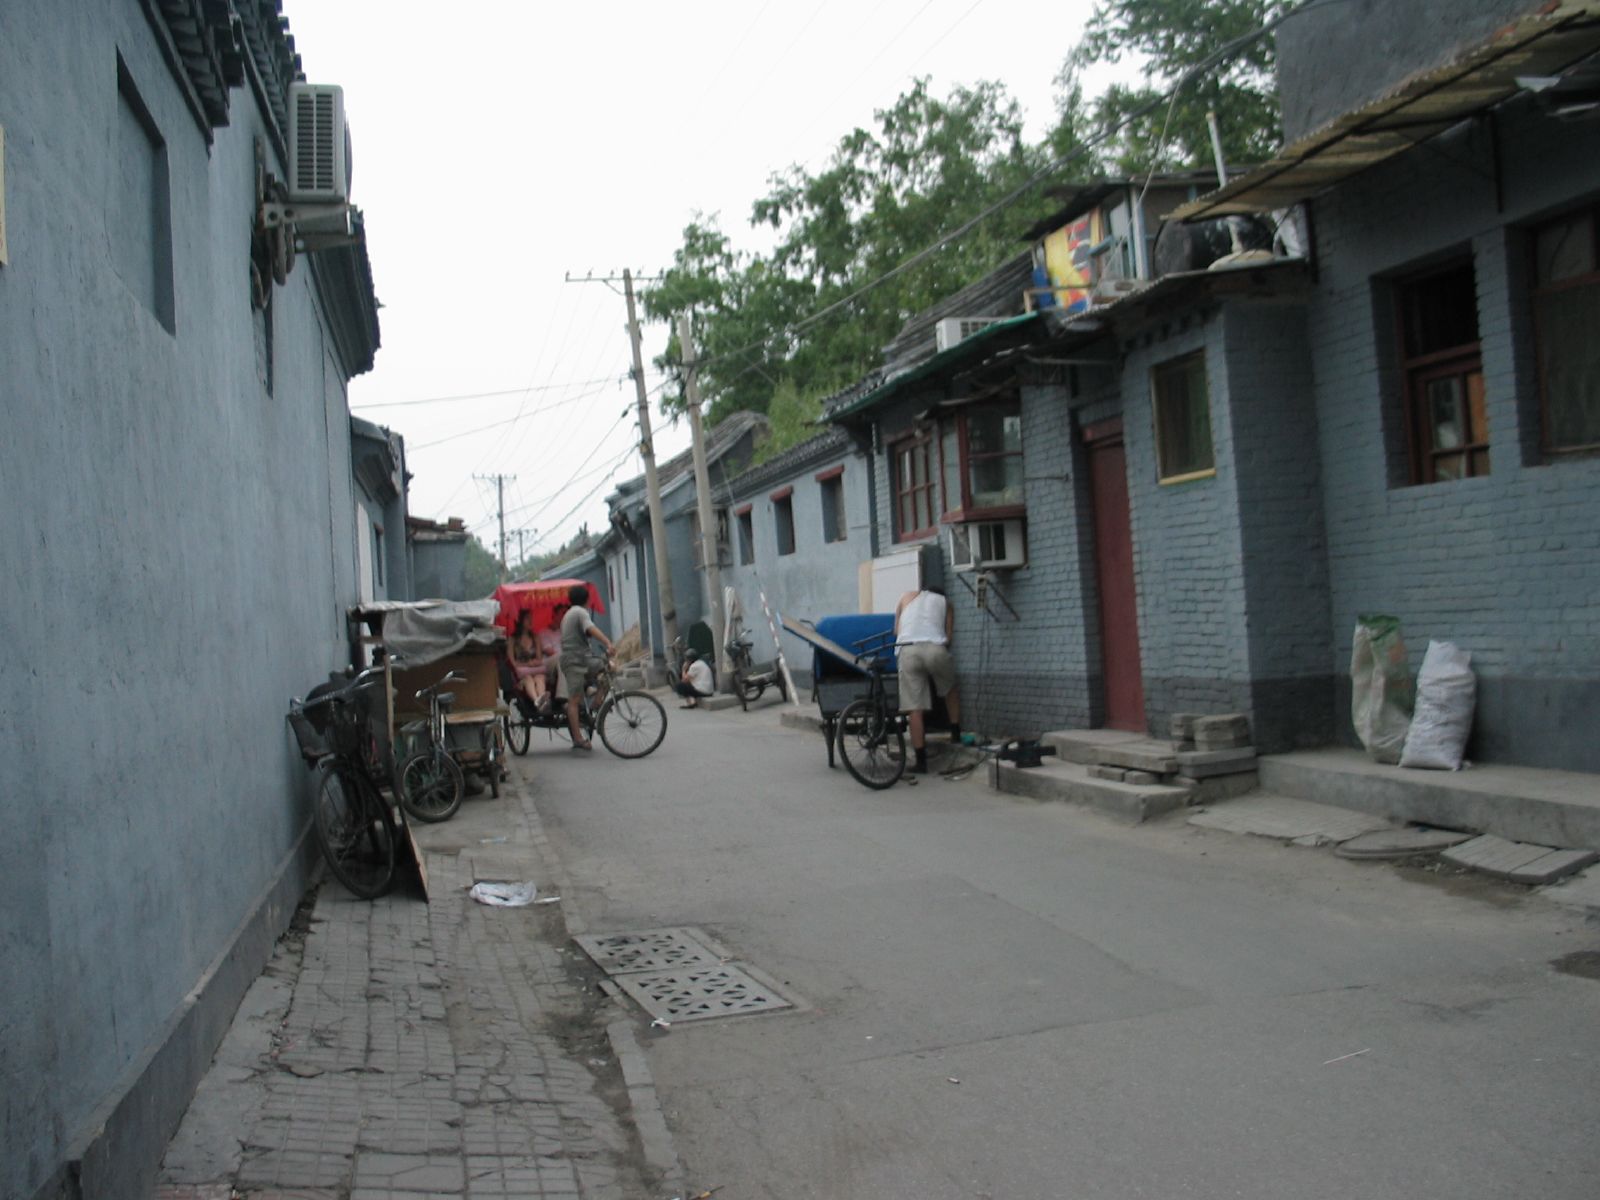 an alley in a neighborhood has many different bikes on the street